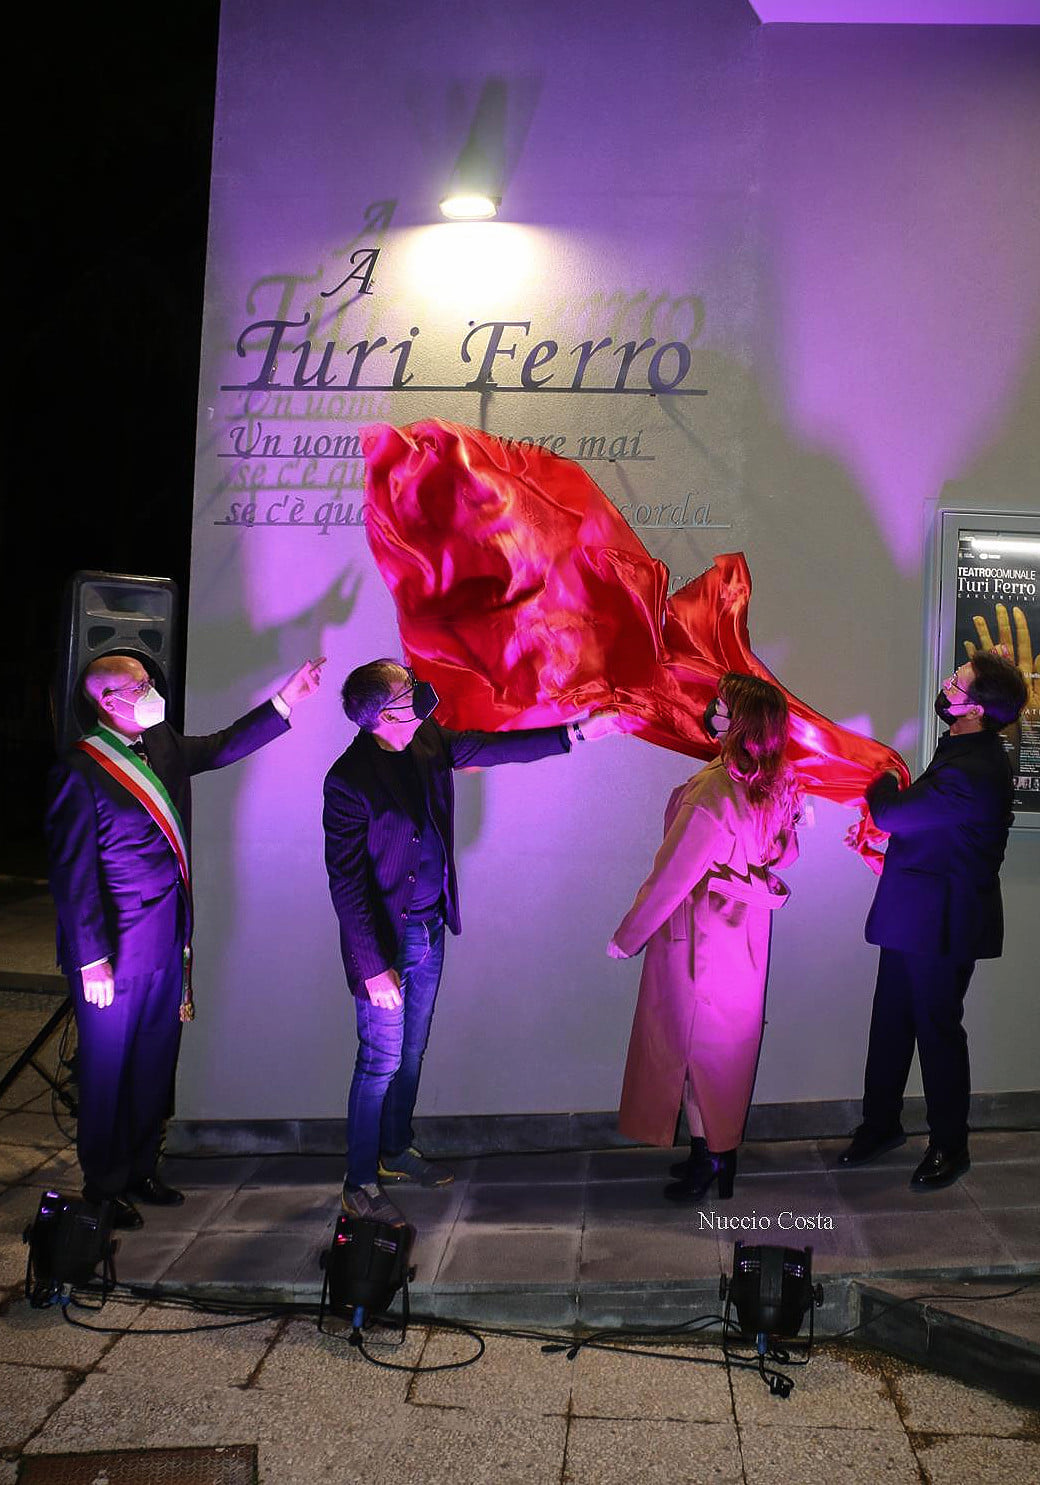 INAUGURATION OF THE MUNICIPAL THEATER “TURI FERRO” IN CARLENTINI:  “THE CURTAIN HAS OPENED THE DOOR OF EMOTIONS”